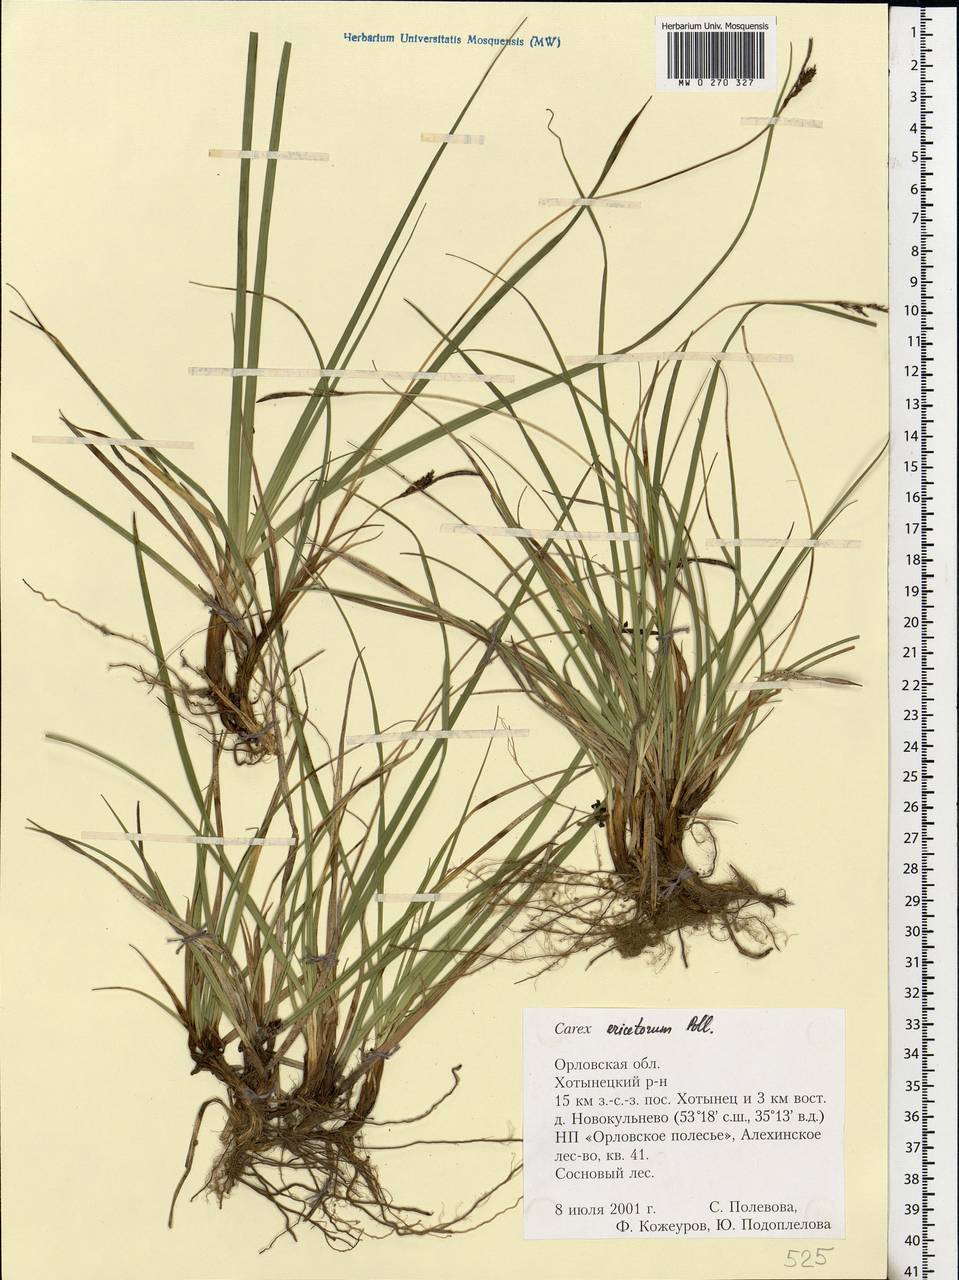 Carex ericetorum Pollich, Eastern Europe, Central forest-and-steppe region (E6) (Russia)